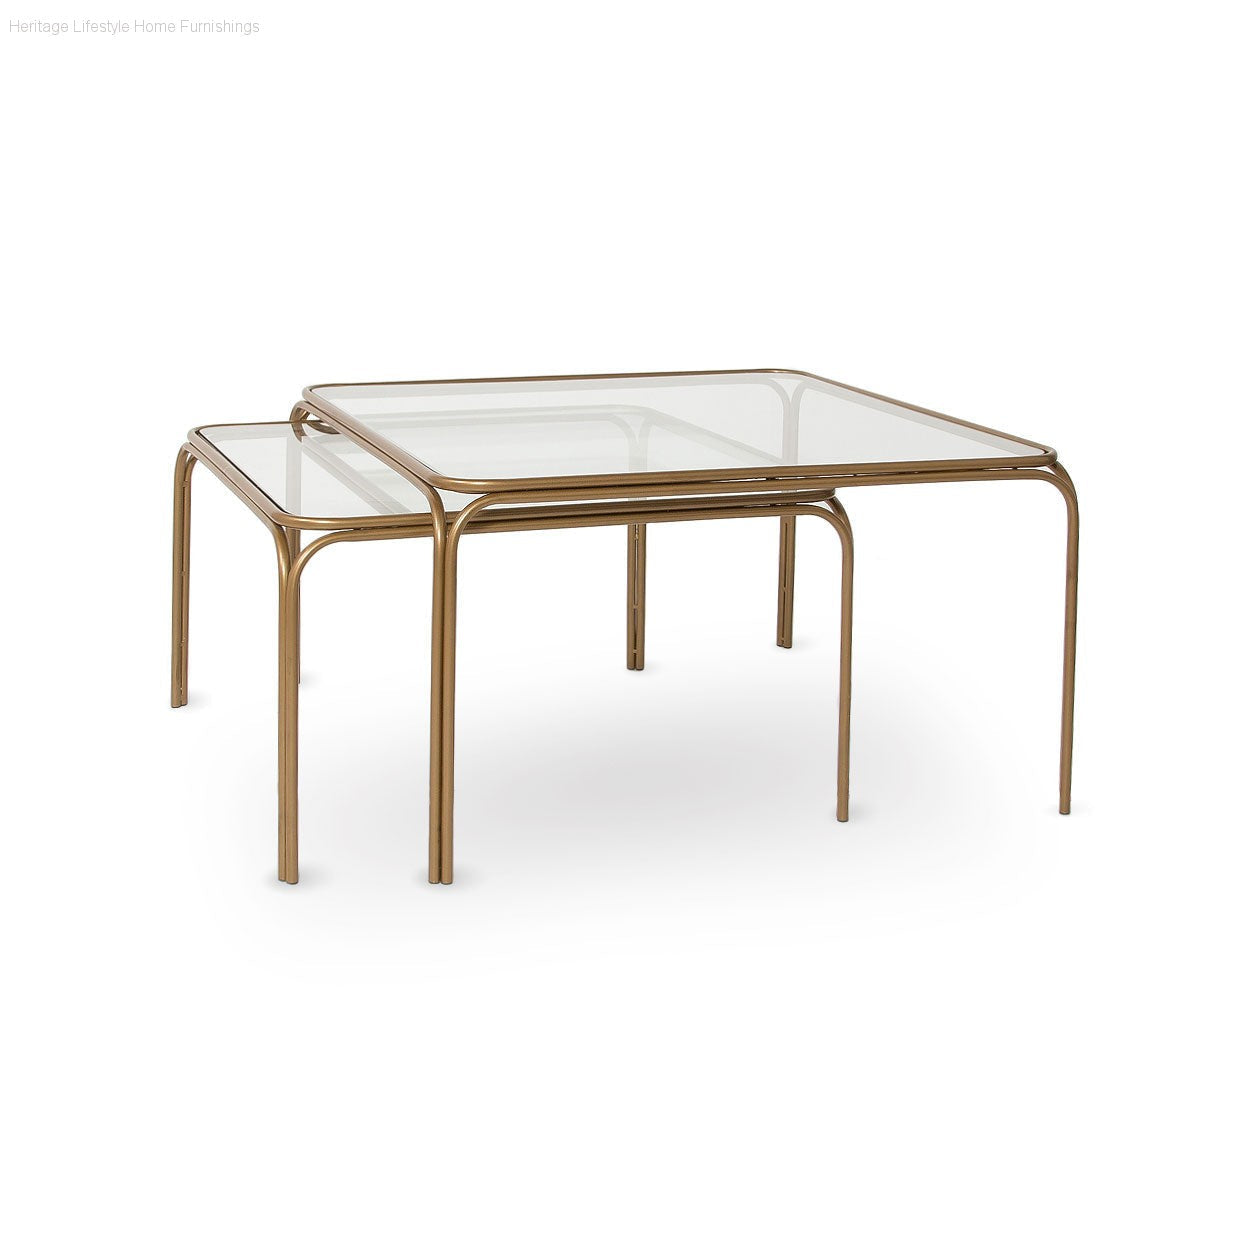 HLHF Deco Coffee Table - Gold Living, Occasional Furniture Store Burlington Ontario Near Me 